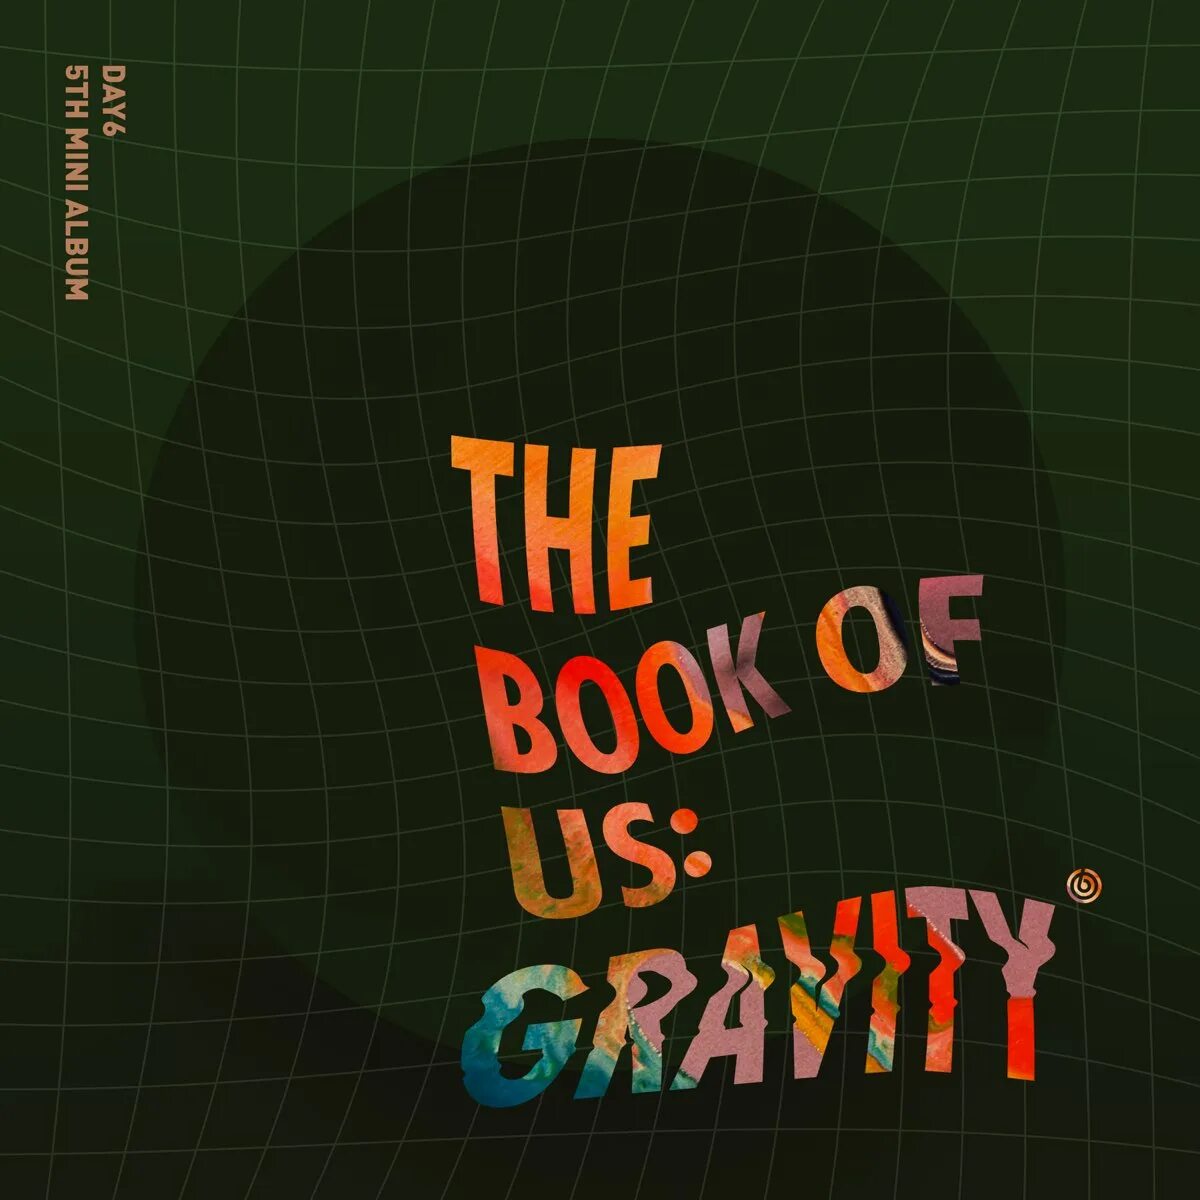 Cover day6. Day6 альбомы. The book of us : Gravity day6. Day6 the bookof us обложка альбома. The Gravity of us книга.